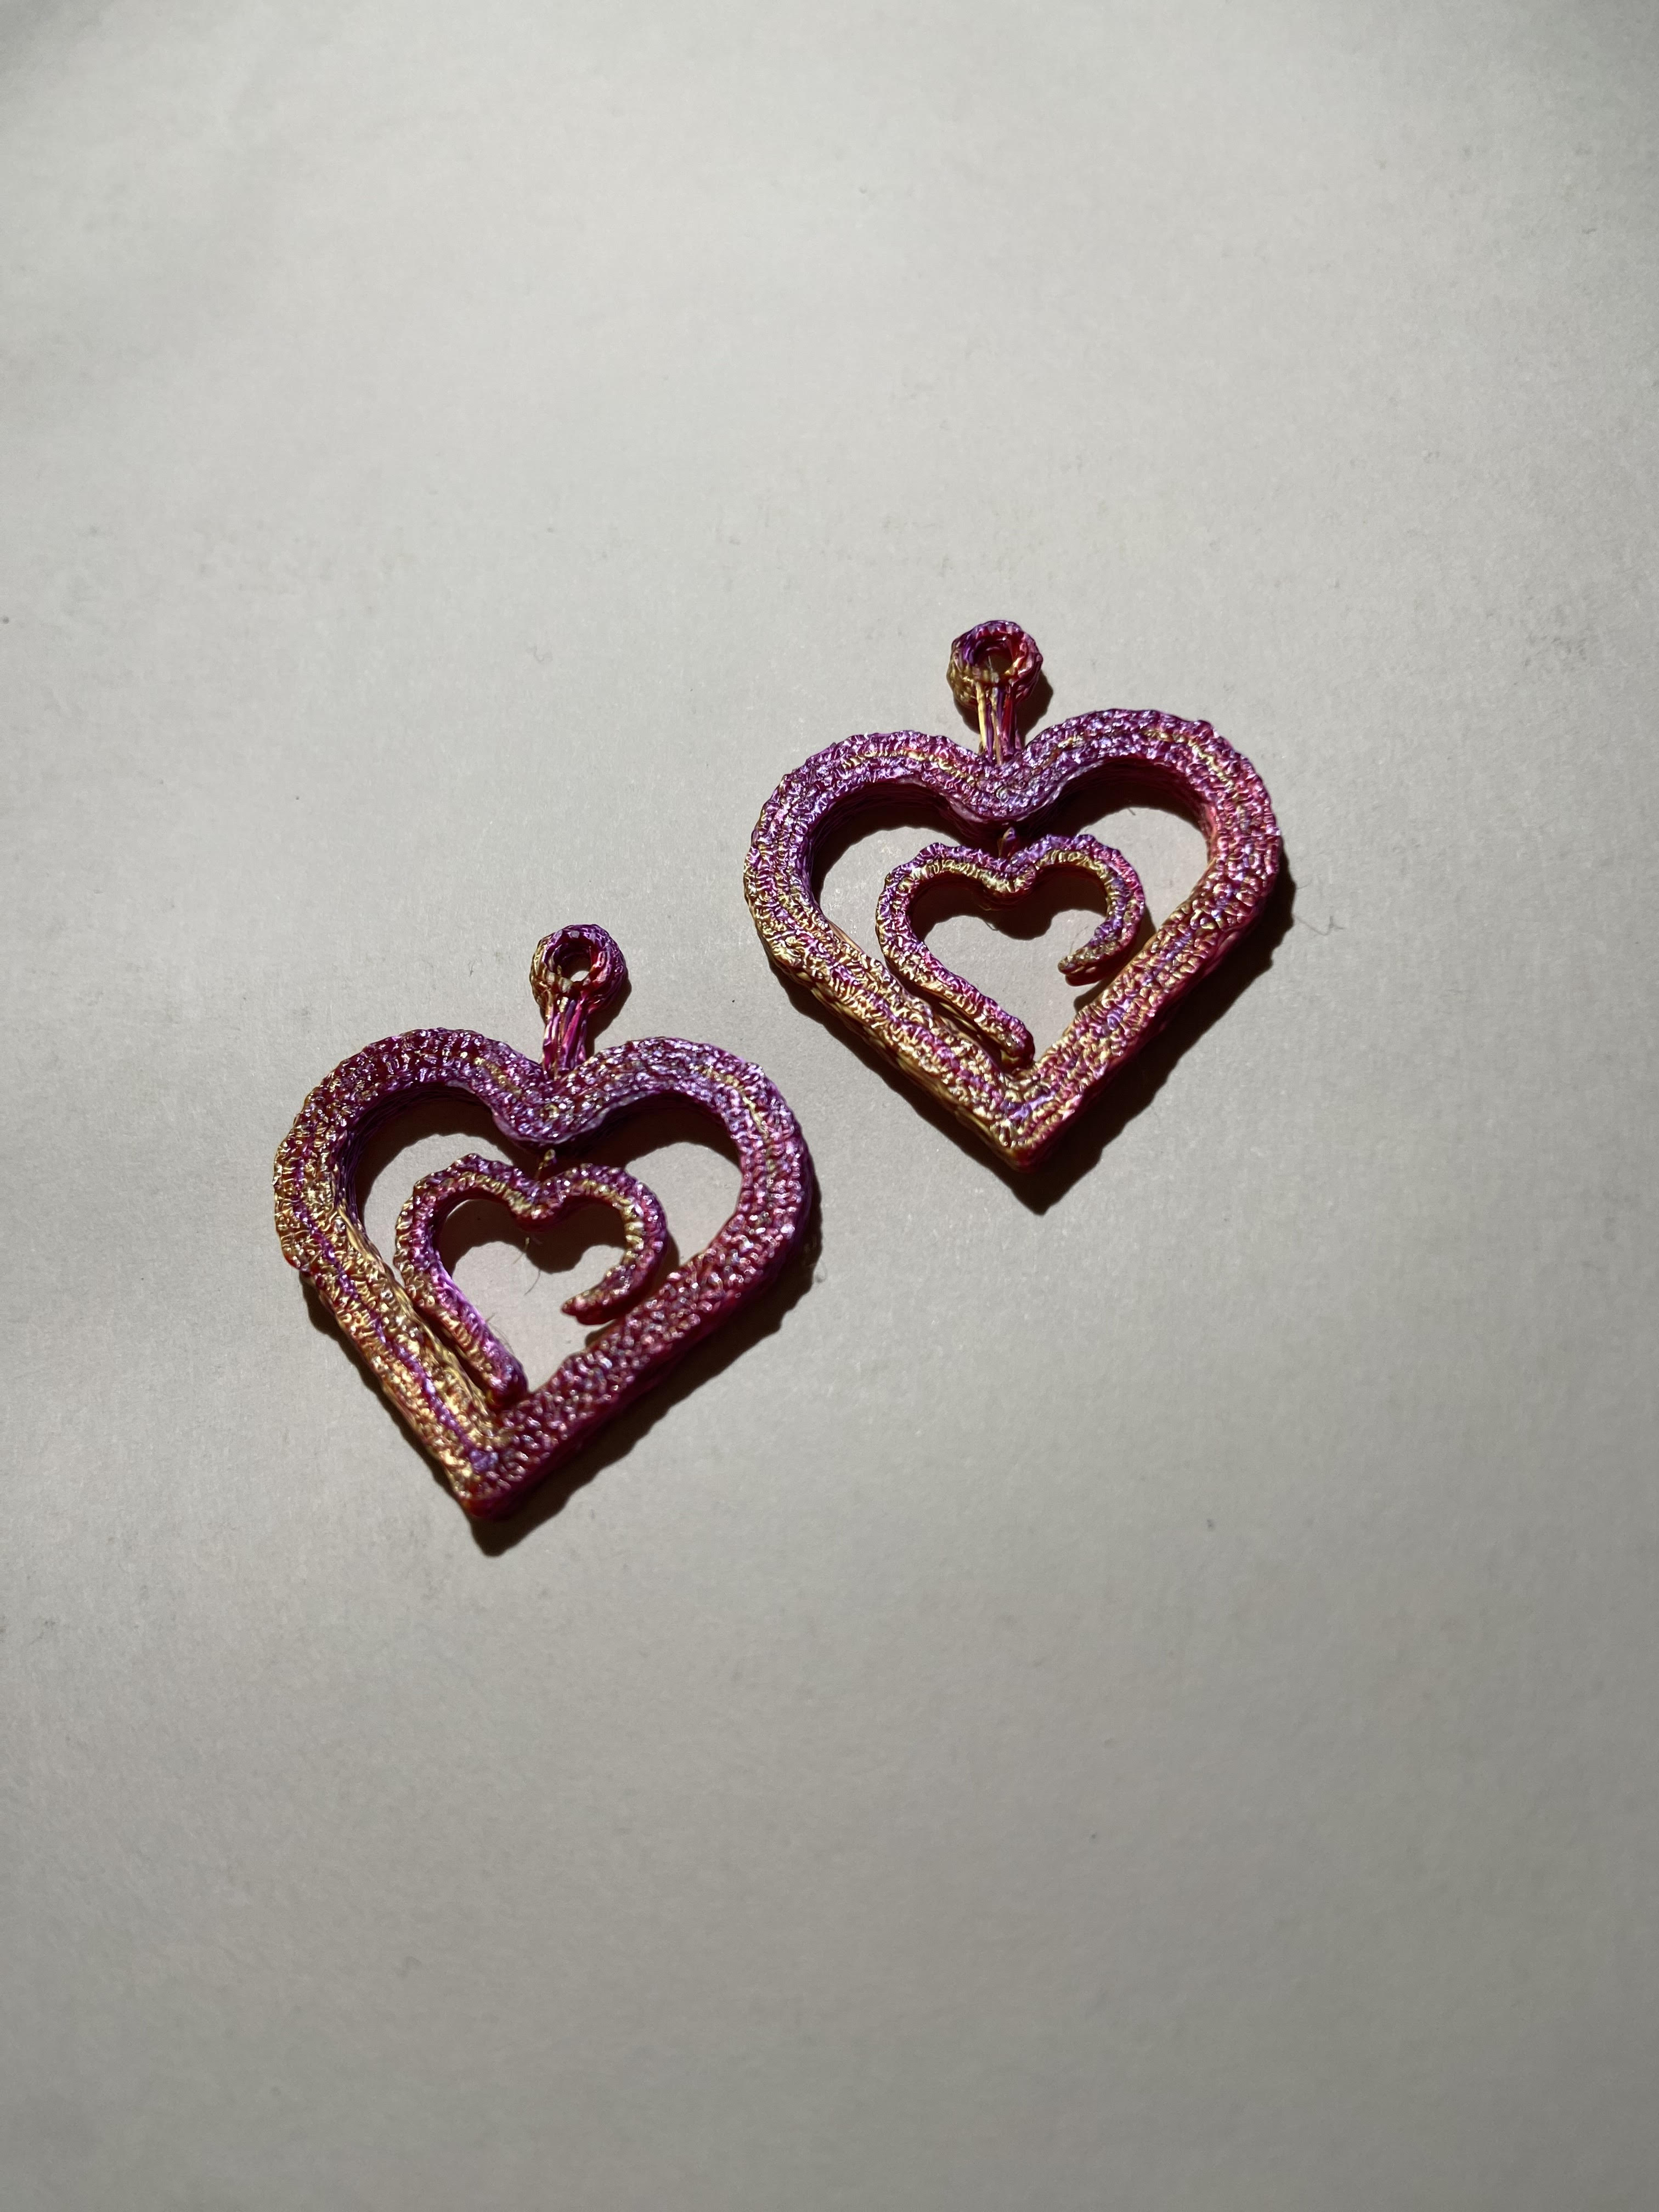 Spinning Heart Earrings by Norris Creations | Download free STL model ...